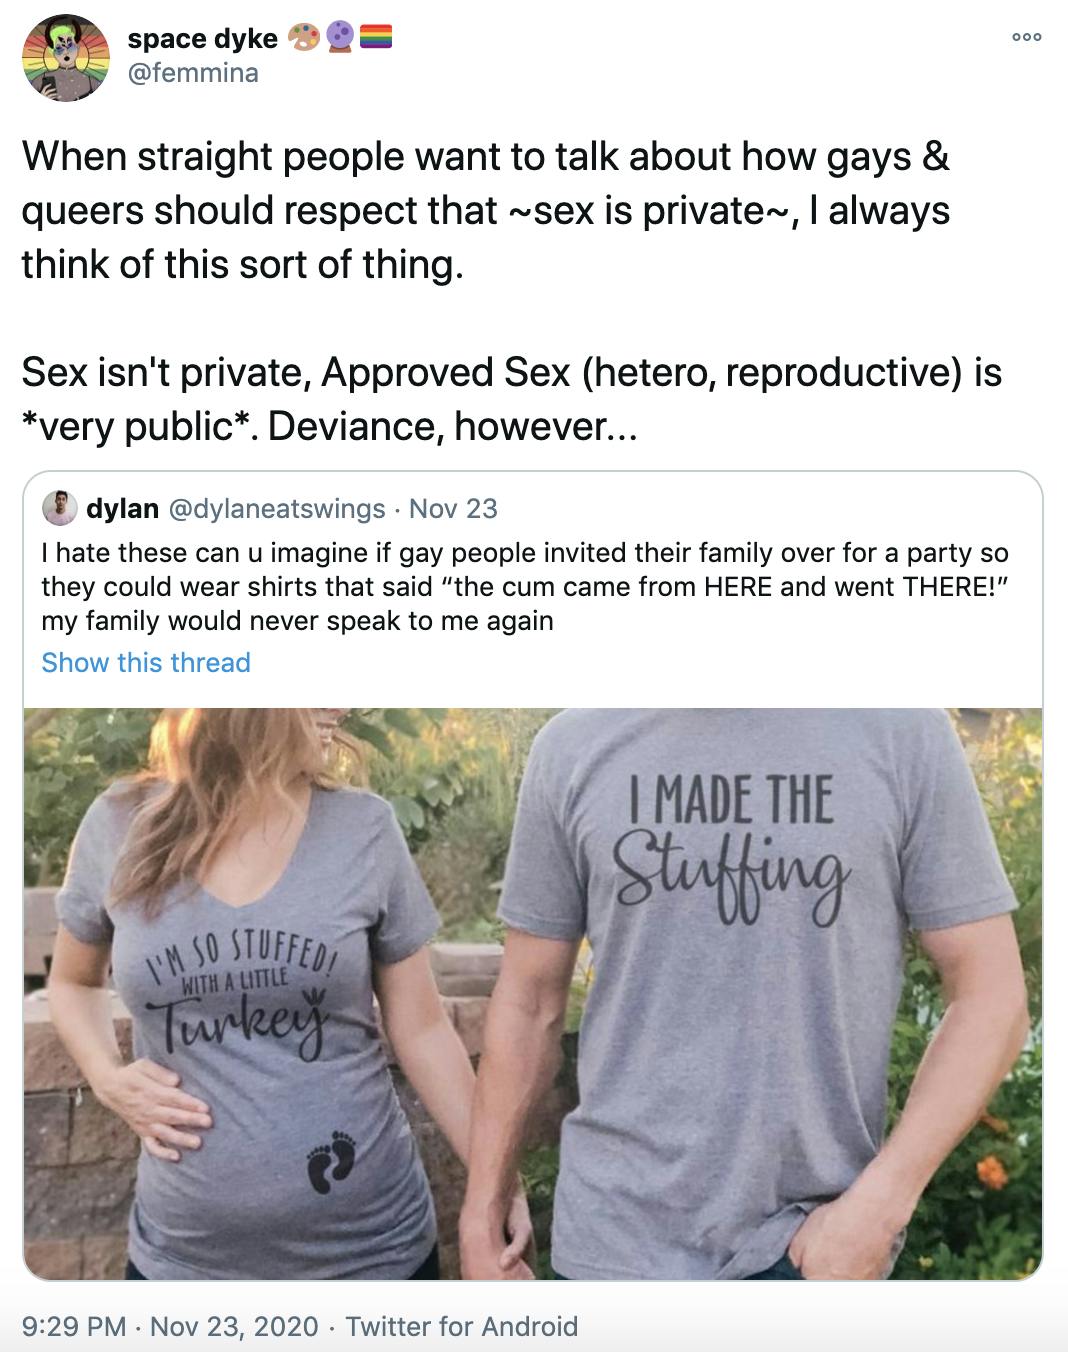 When straight people want to talk about how gays & queers should respect that ~sex is private~, I always think of this sort of thing. Sex isn't private, Approved Sex (hetero, reproductive) is *very public*. Deviance, however...